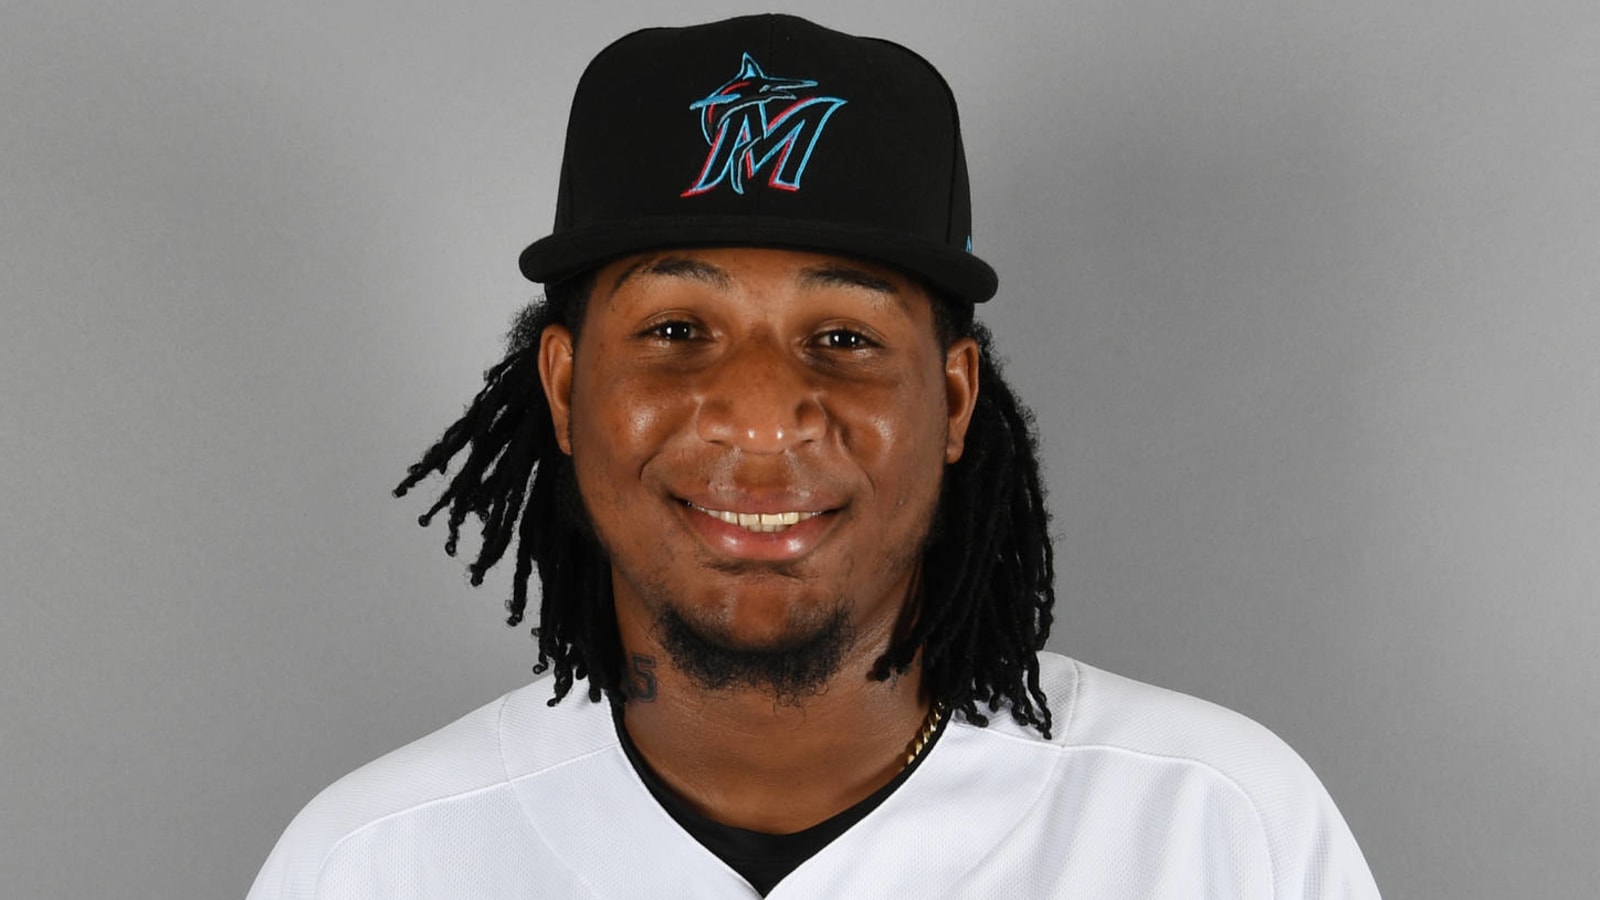 Marlins going all in, call up top prospects Sixto Sanchez, Jesus Sanchez